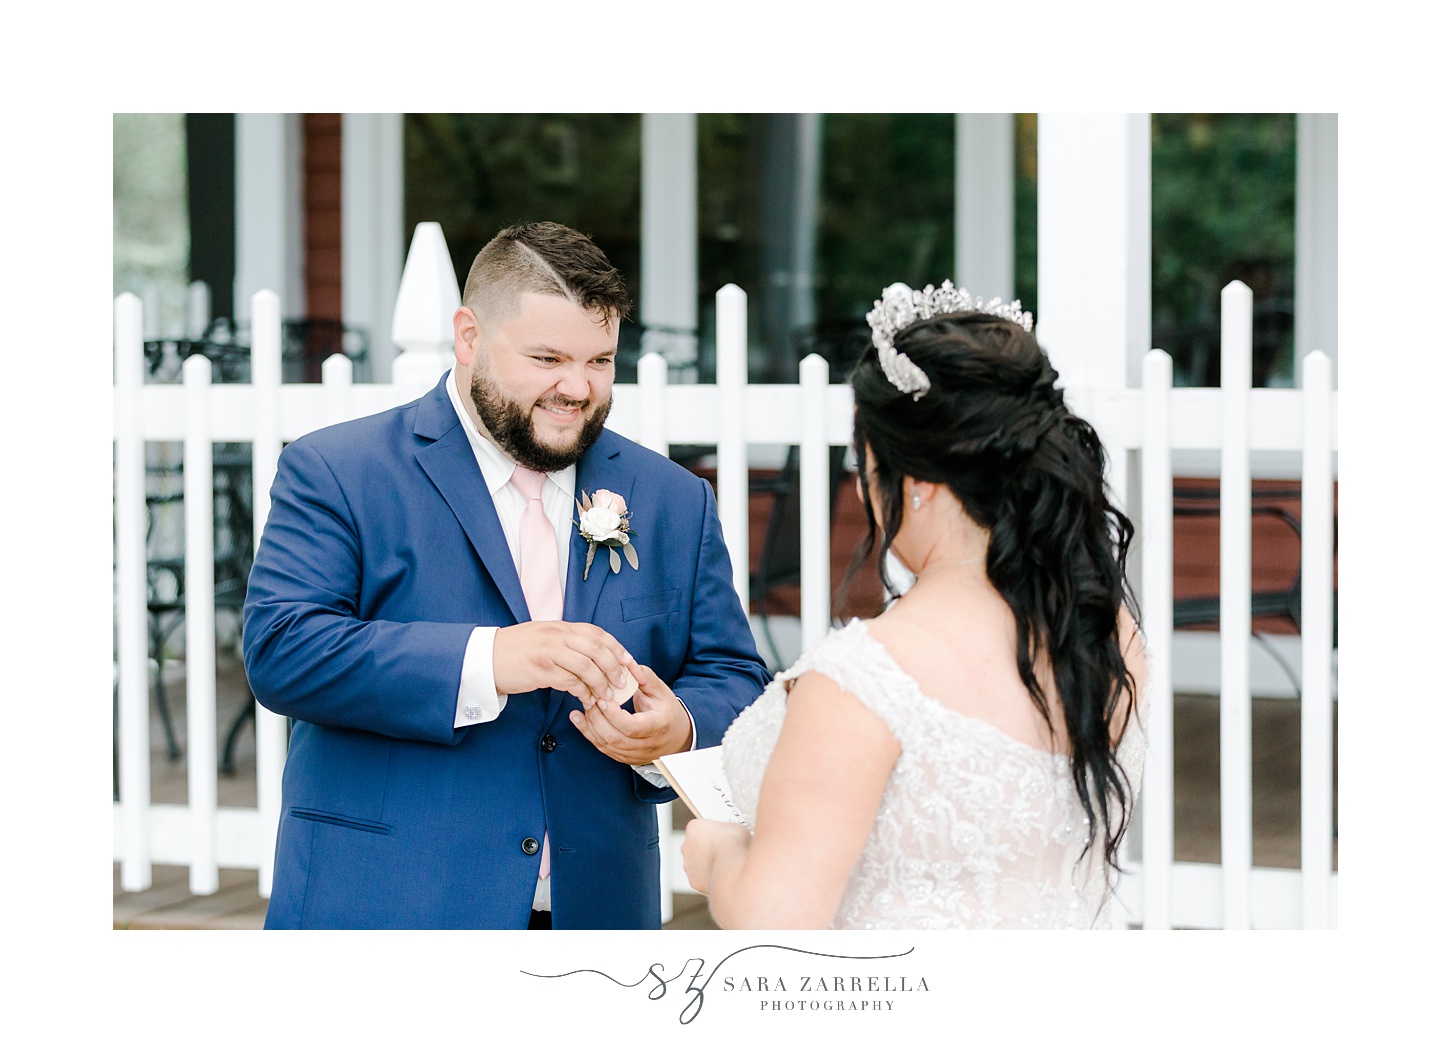 groom gives bride a gift on Blissful Meadows wedding day